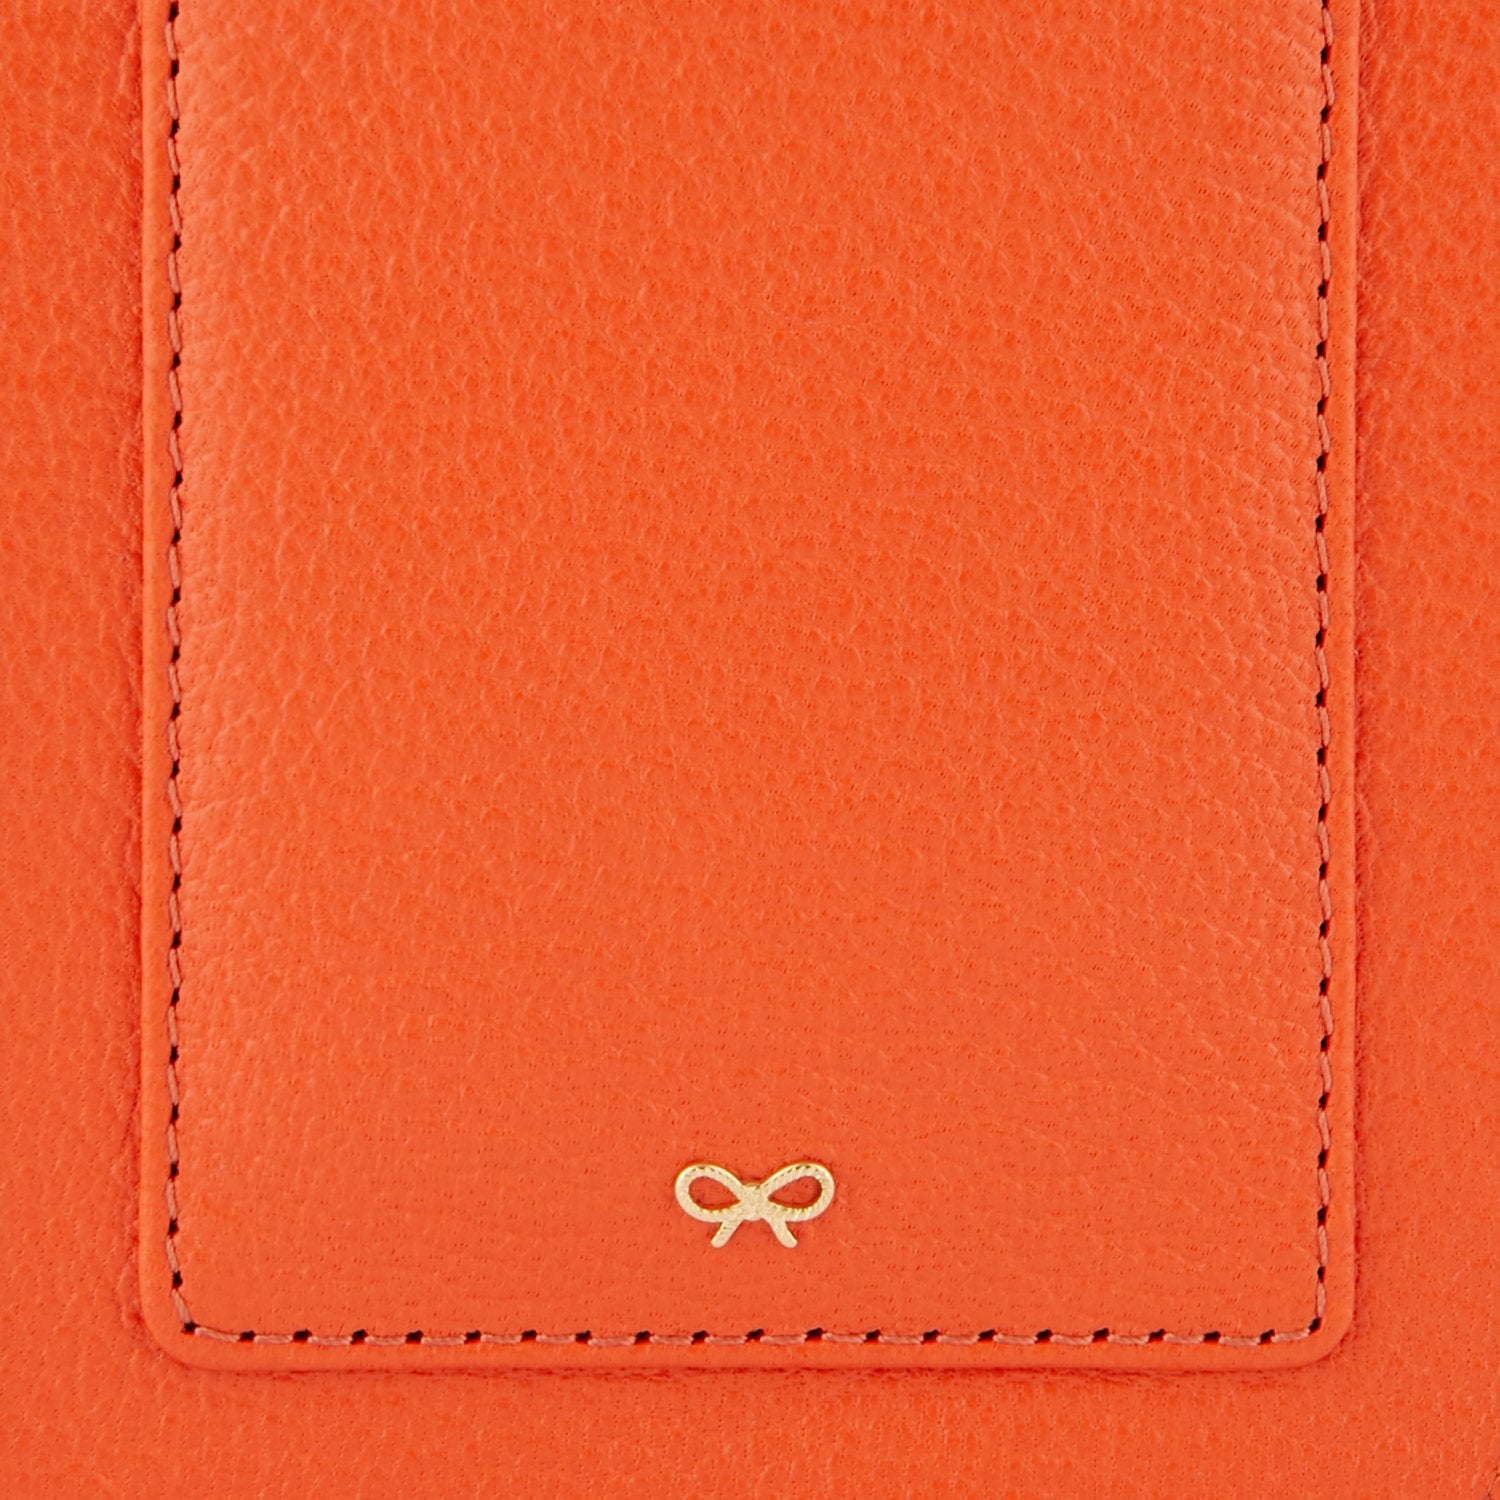 Bespoke Phone Pouch on Strap -

                  
                    Capra in Clementine -
                  

                  Anya Hindmarch US
